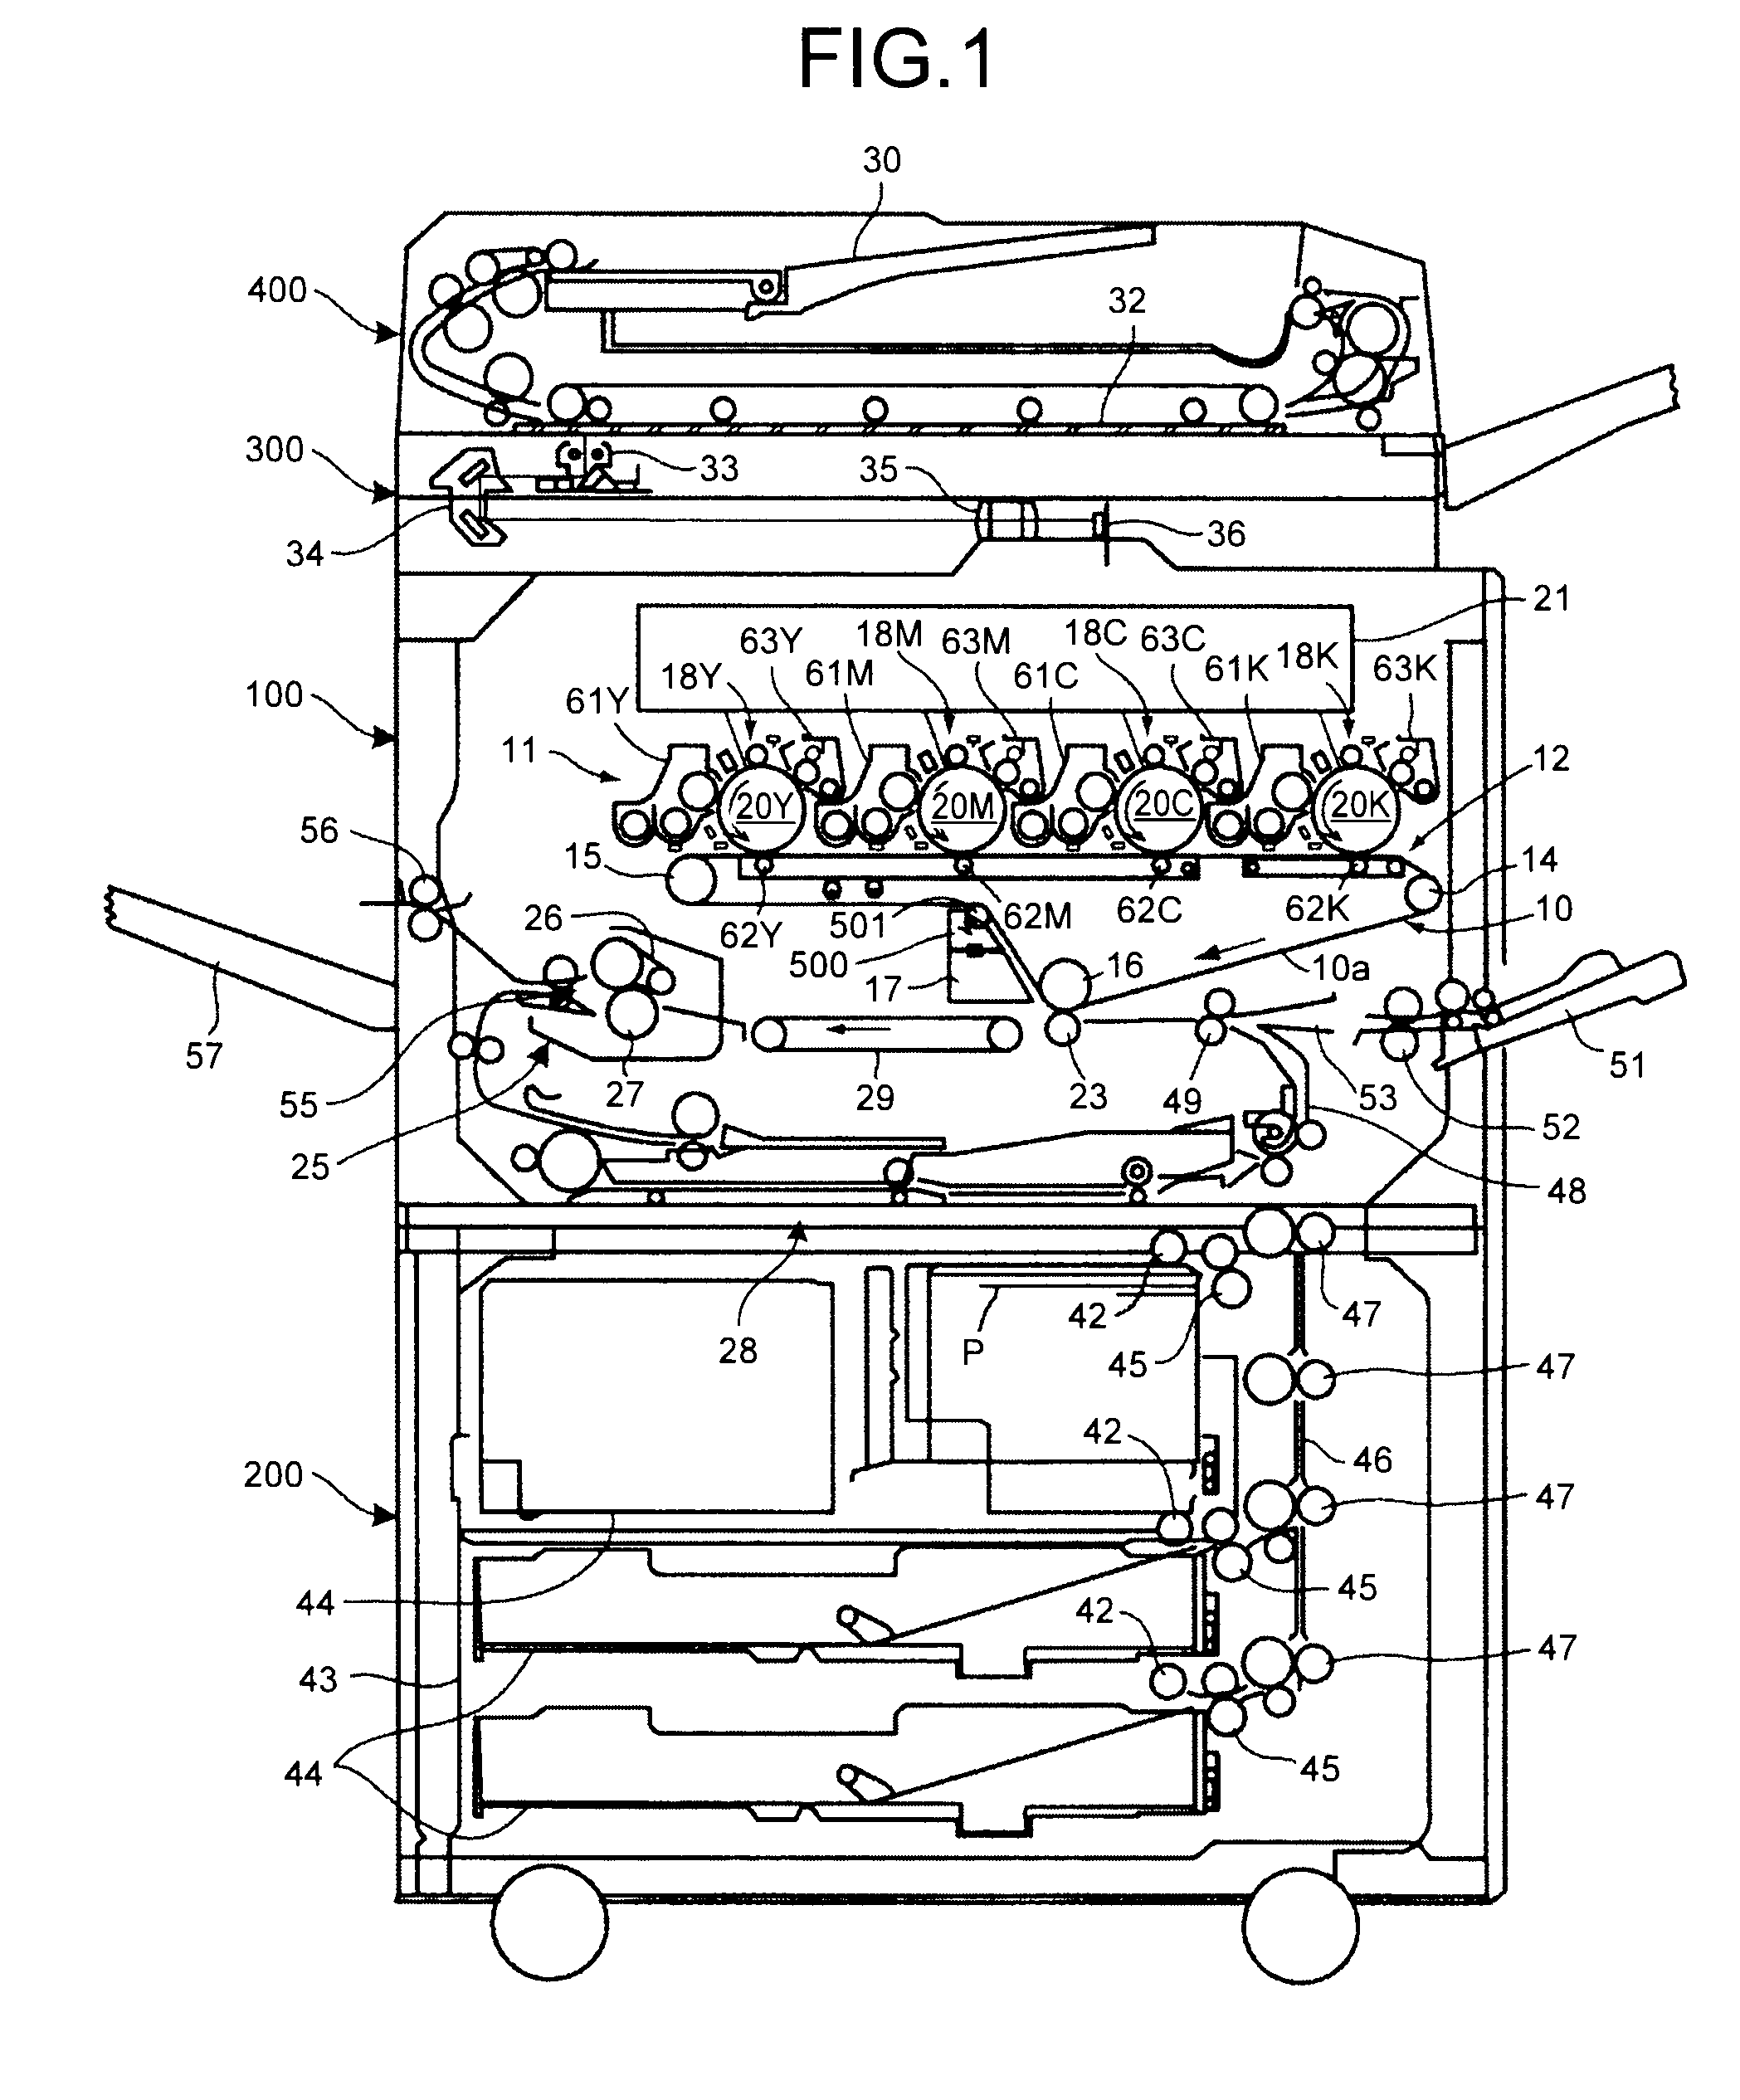 Image forming apparatus and belt tensioning unit